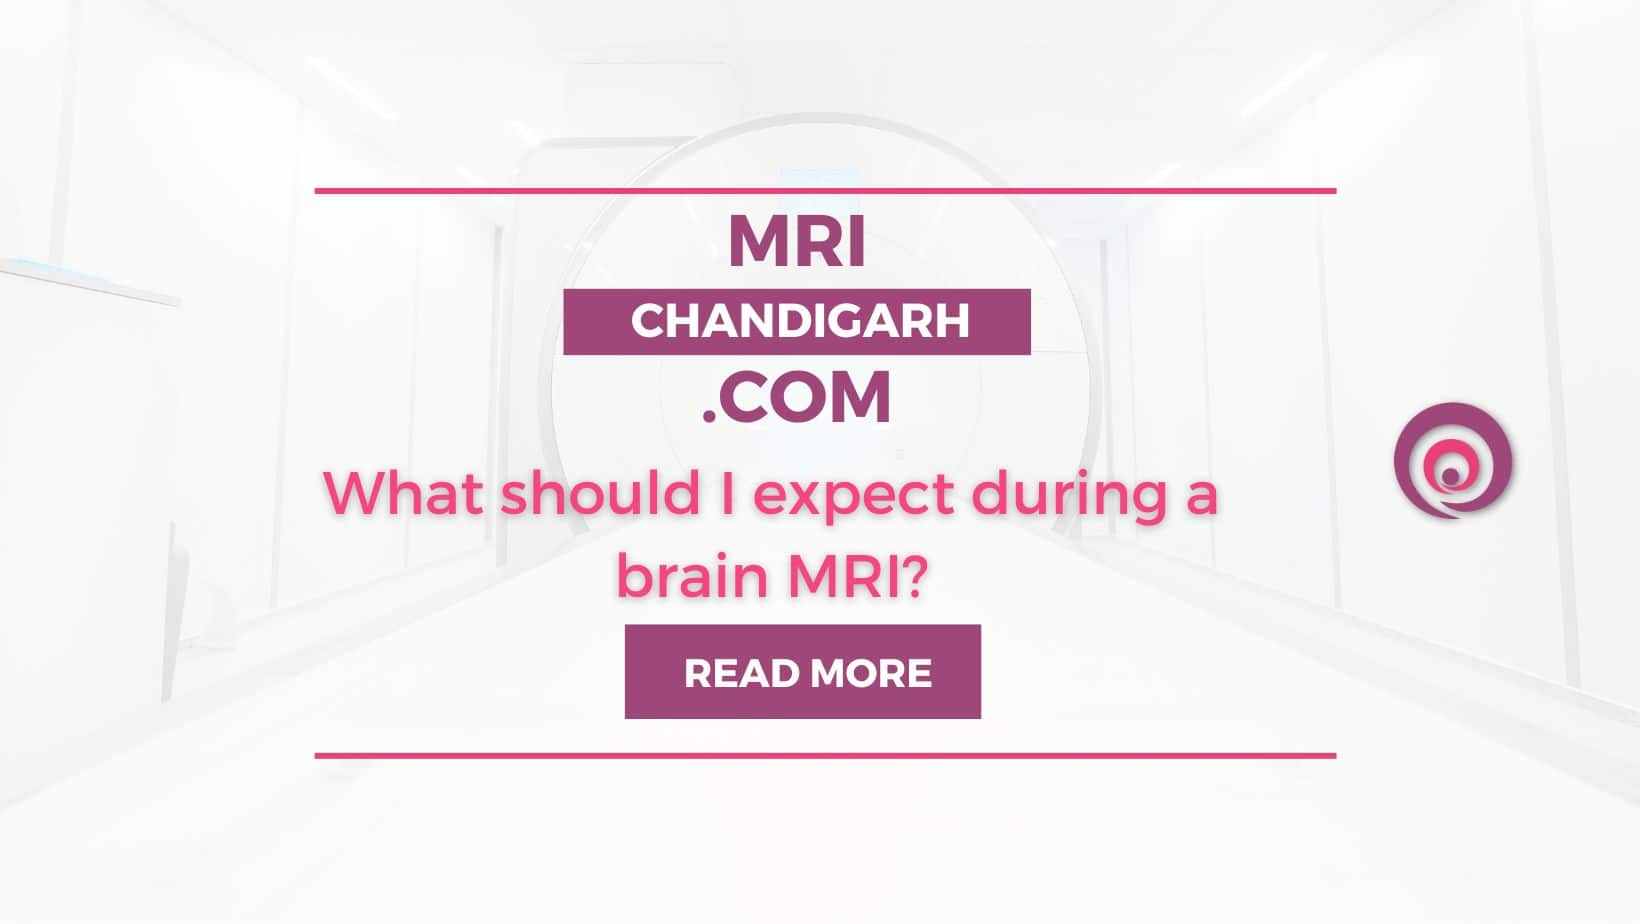 What should I expect during a brain MRI?